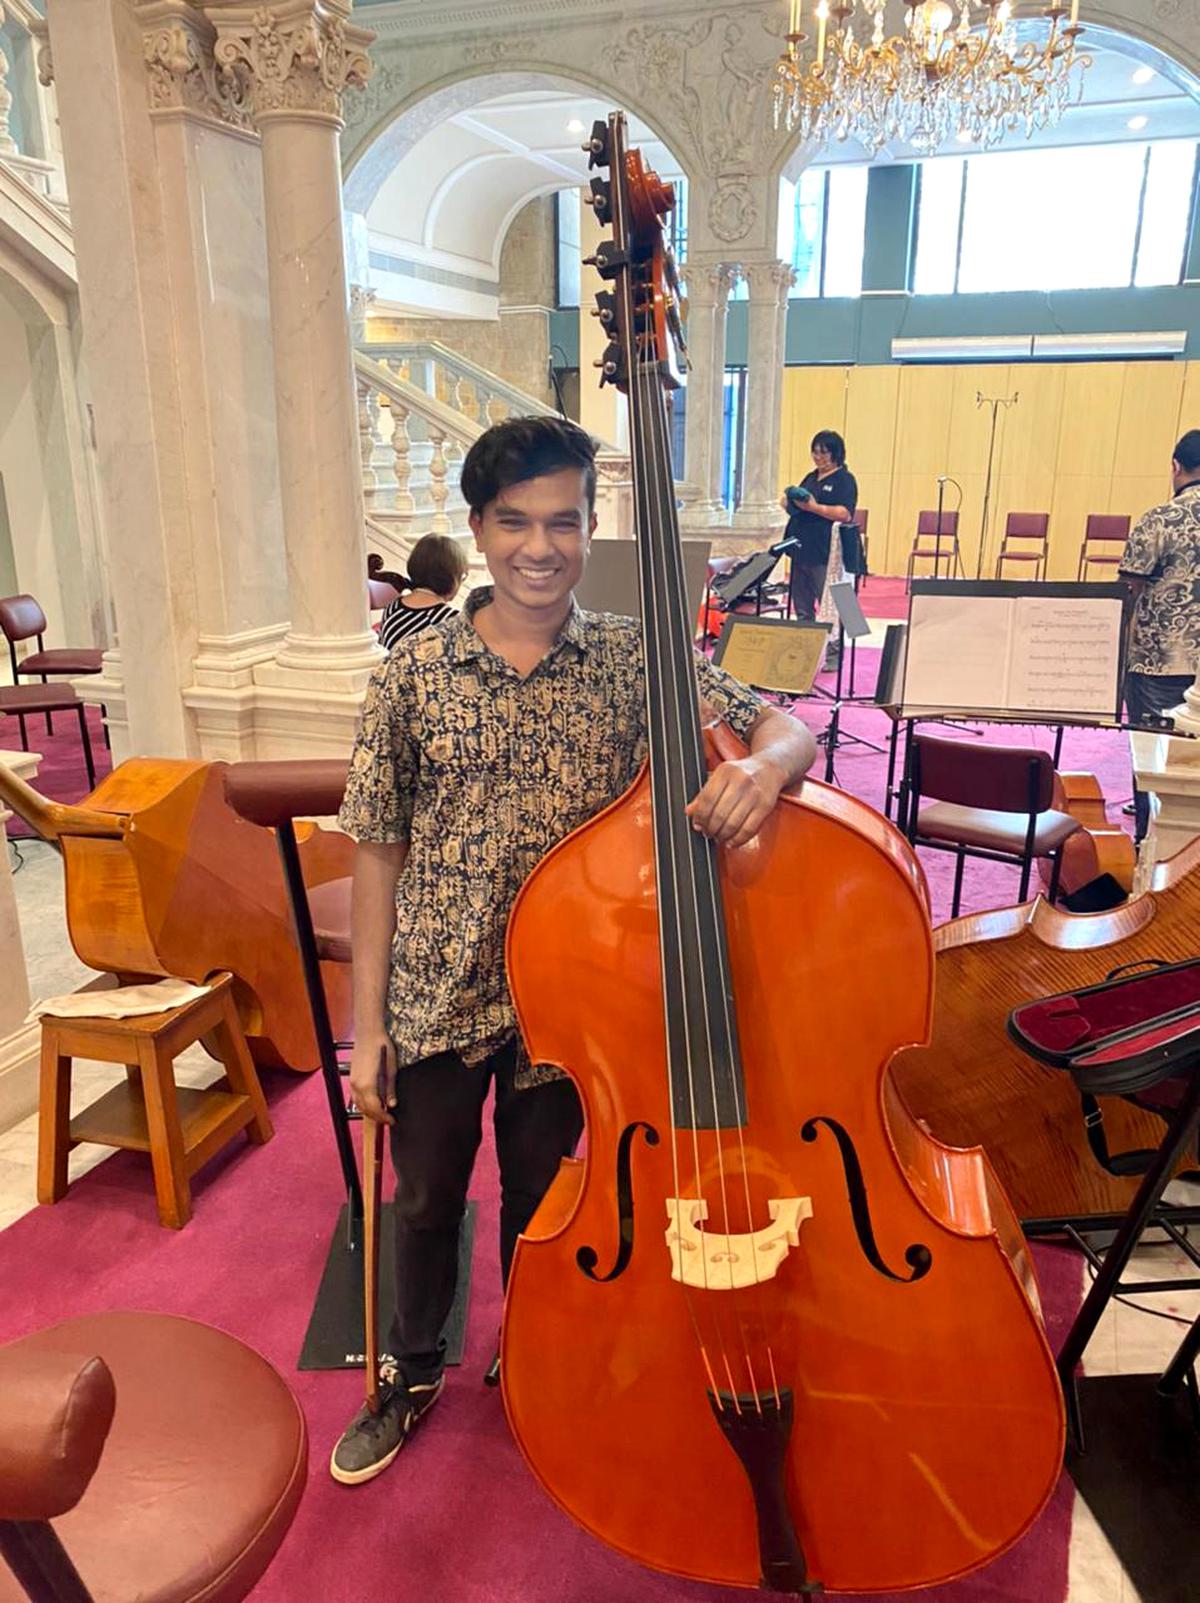 Bengaluru resident Jasiel Peter, who trained to play the piano and violin, taught himself how to play the double bass through online videos.